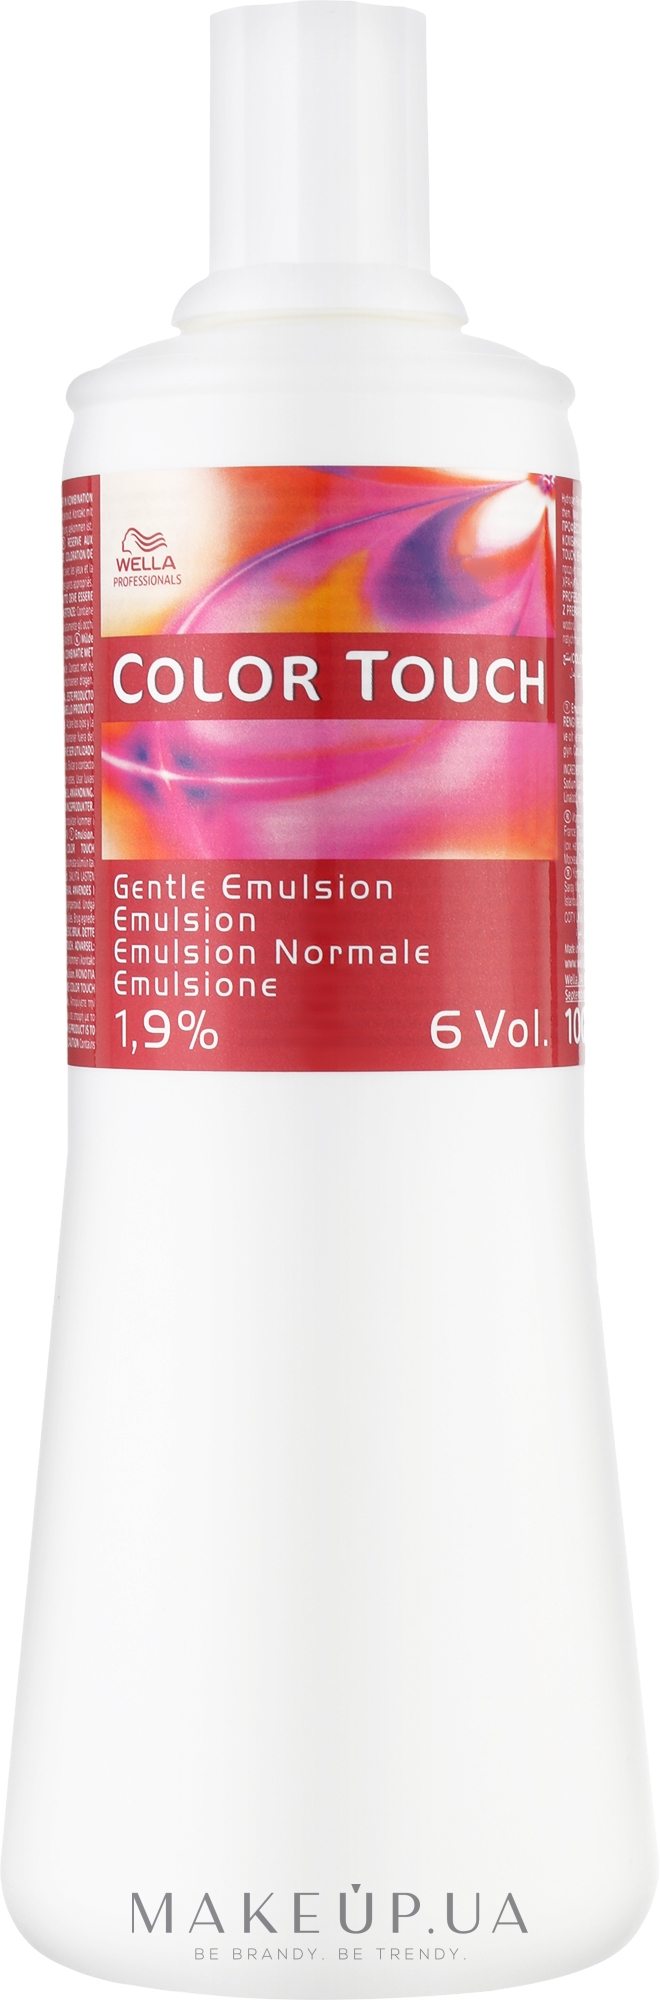 Эмульсия для краски Color Touch - Wella Professionals Color Touch Emulsion 1.9% — фото 1000ml